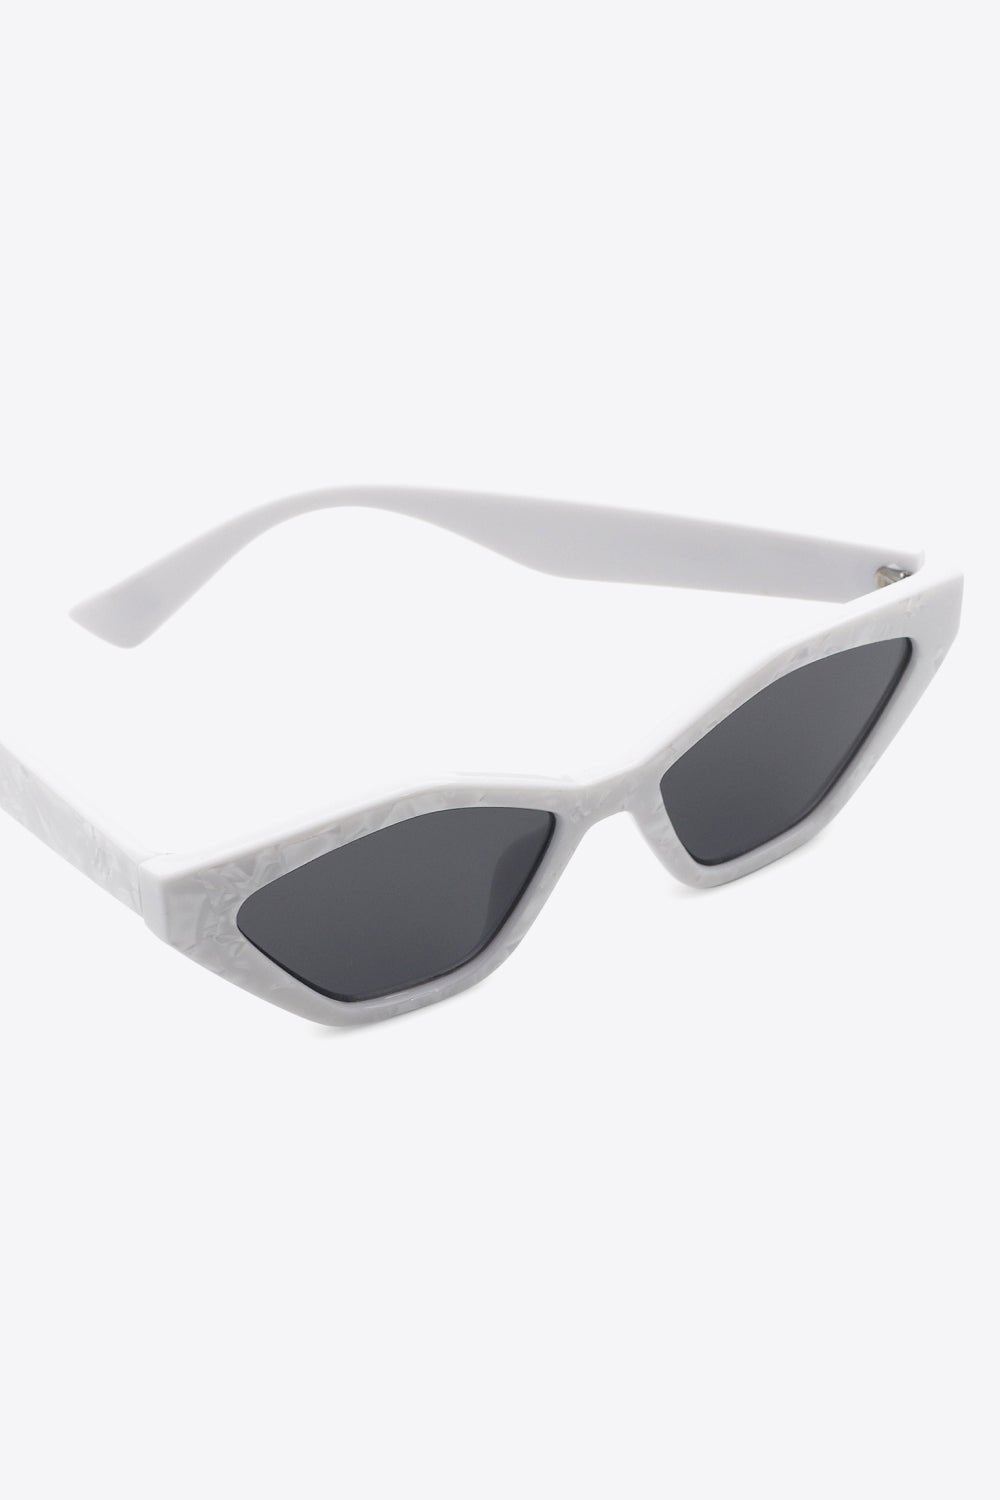 Sunglasses in Cat Eye Design with Polycarbonate Lenses